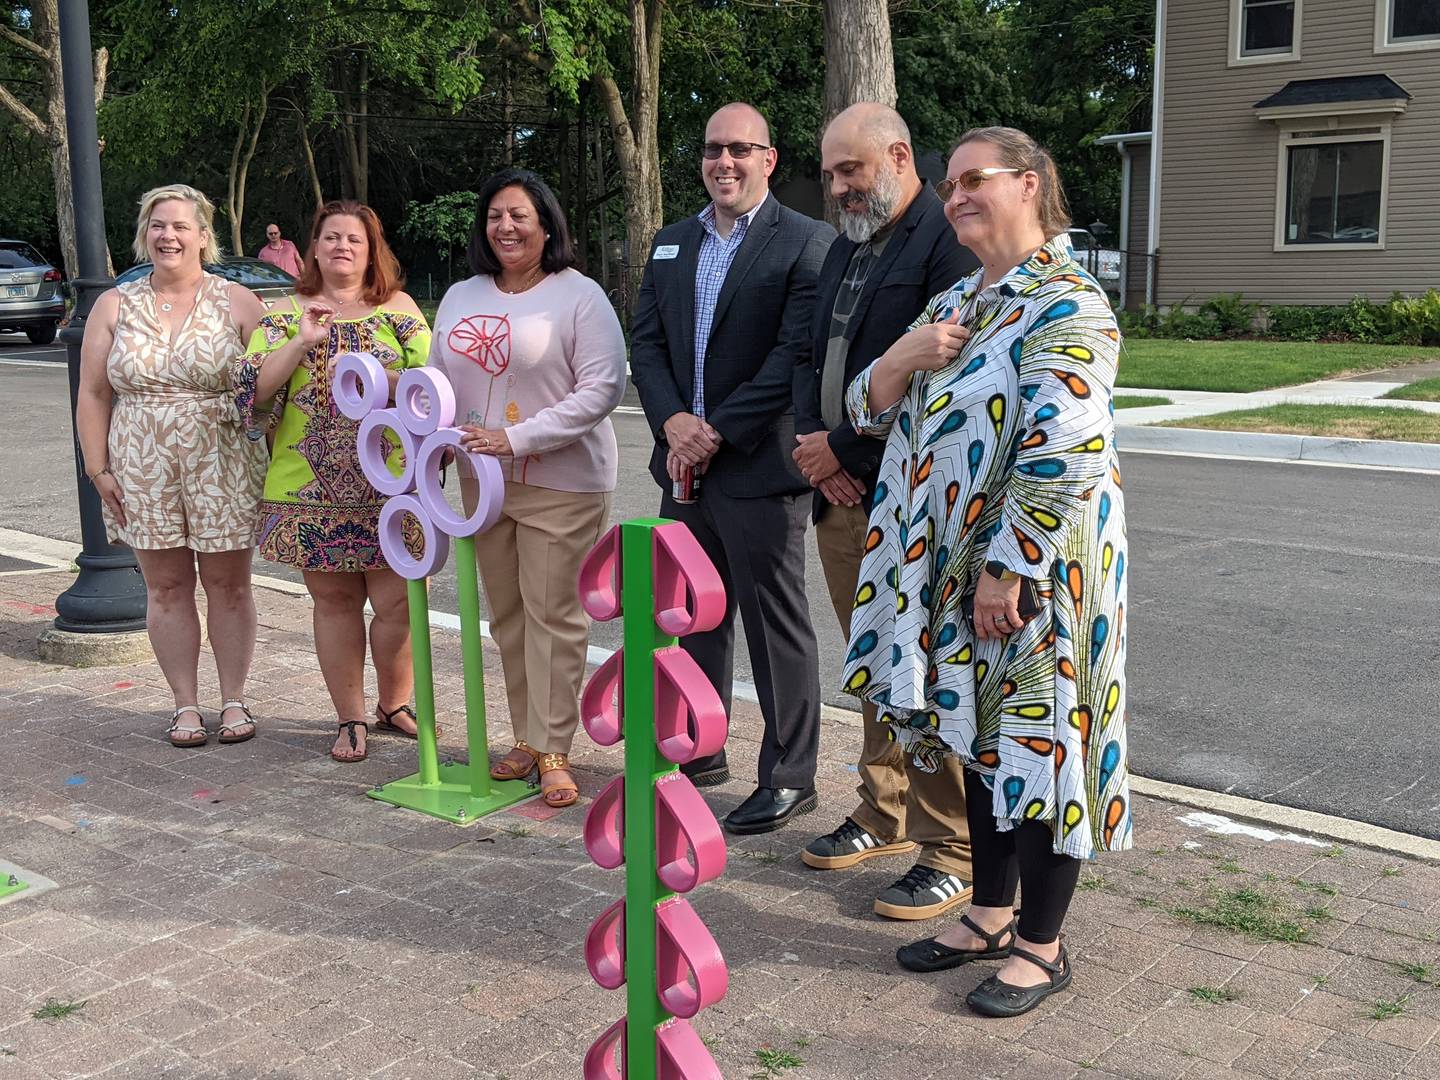 Oswego Village President Ryan Kauffman and members of the Oswego Cultural Arts Commission on June 27 celebrated two new outdoor public art projects in downtown Oswego.